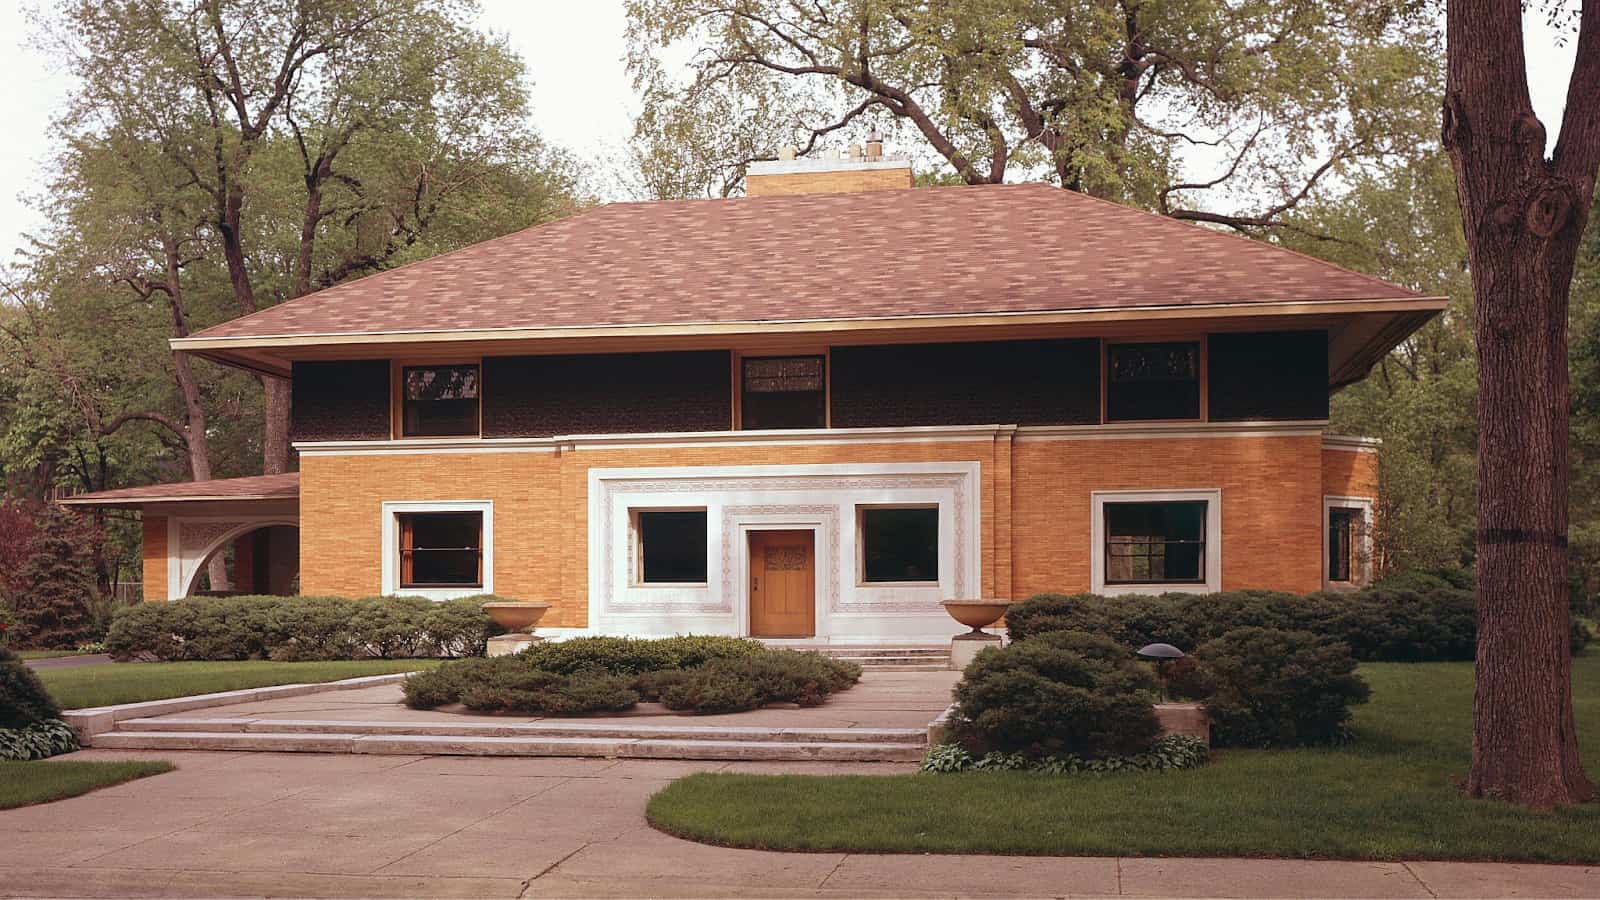 Frank Lloyd Wright’s first “Prairie House,” built in 1893–94. Wright would go on to exemplify the “new architecture” first called for by Viollet-le-Duc: putting modern materials, construction methods, and ideologies together in accessible ways. <span class="figure--credit">Photo by Hedrich Blessing Collection / Chicago History Museum / Getty Images</span>